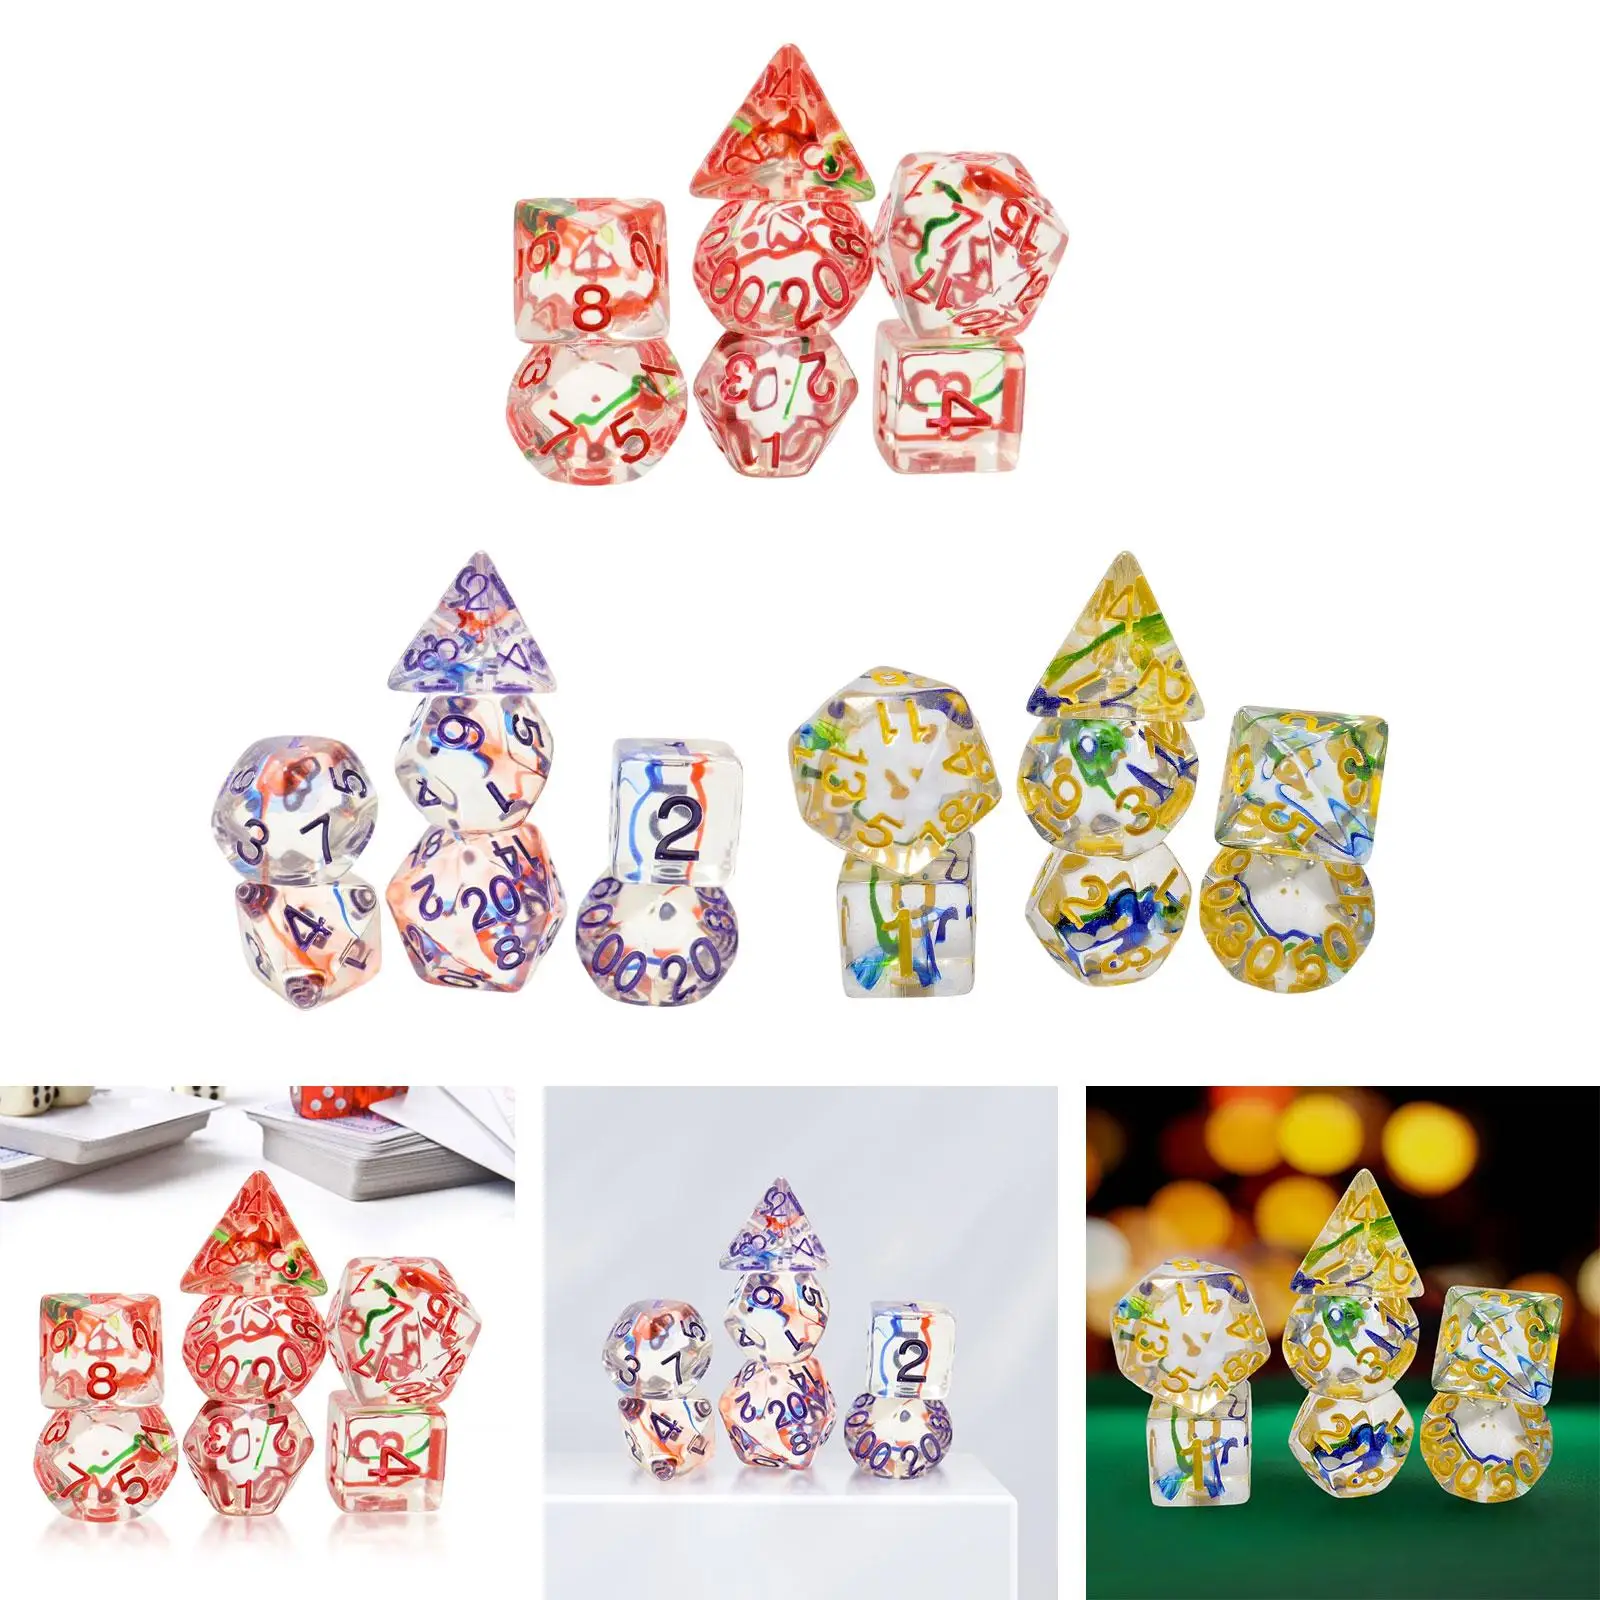 7Pcs Multi Sided Game Dices Party Supplies Entertainment Toys Math Counting Teaching Aids Dice Set for Party KTV Bar Table Game